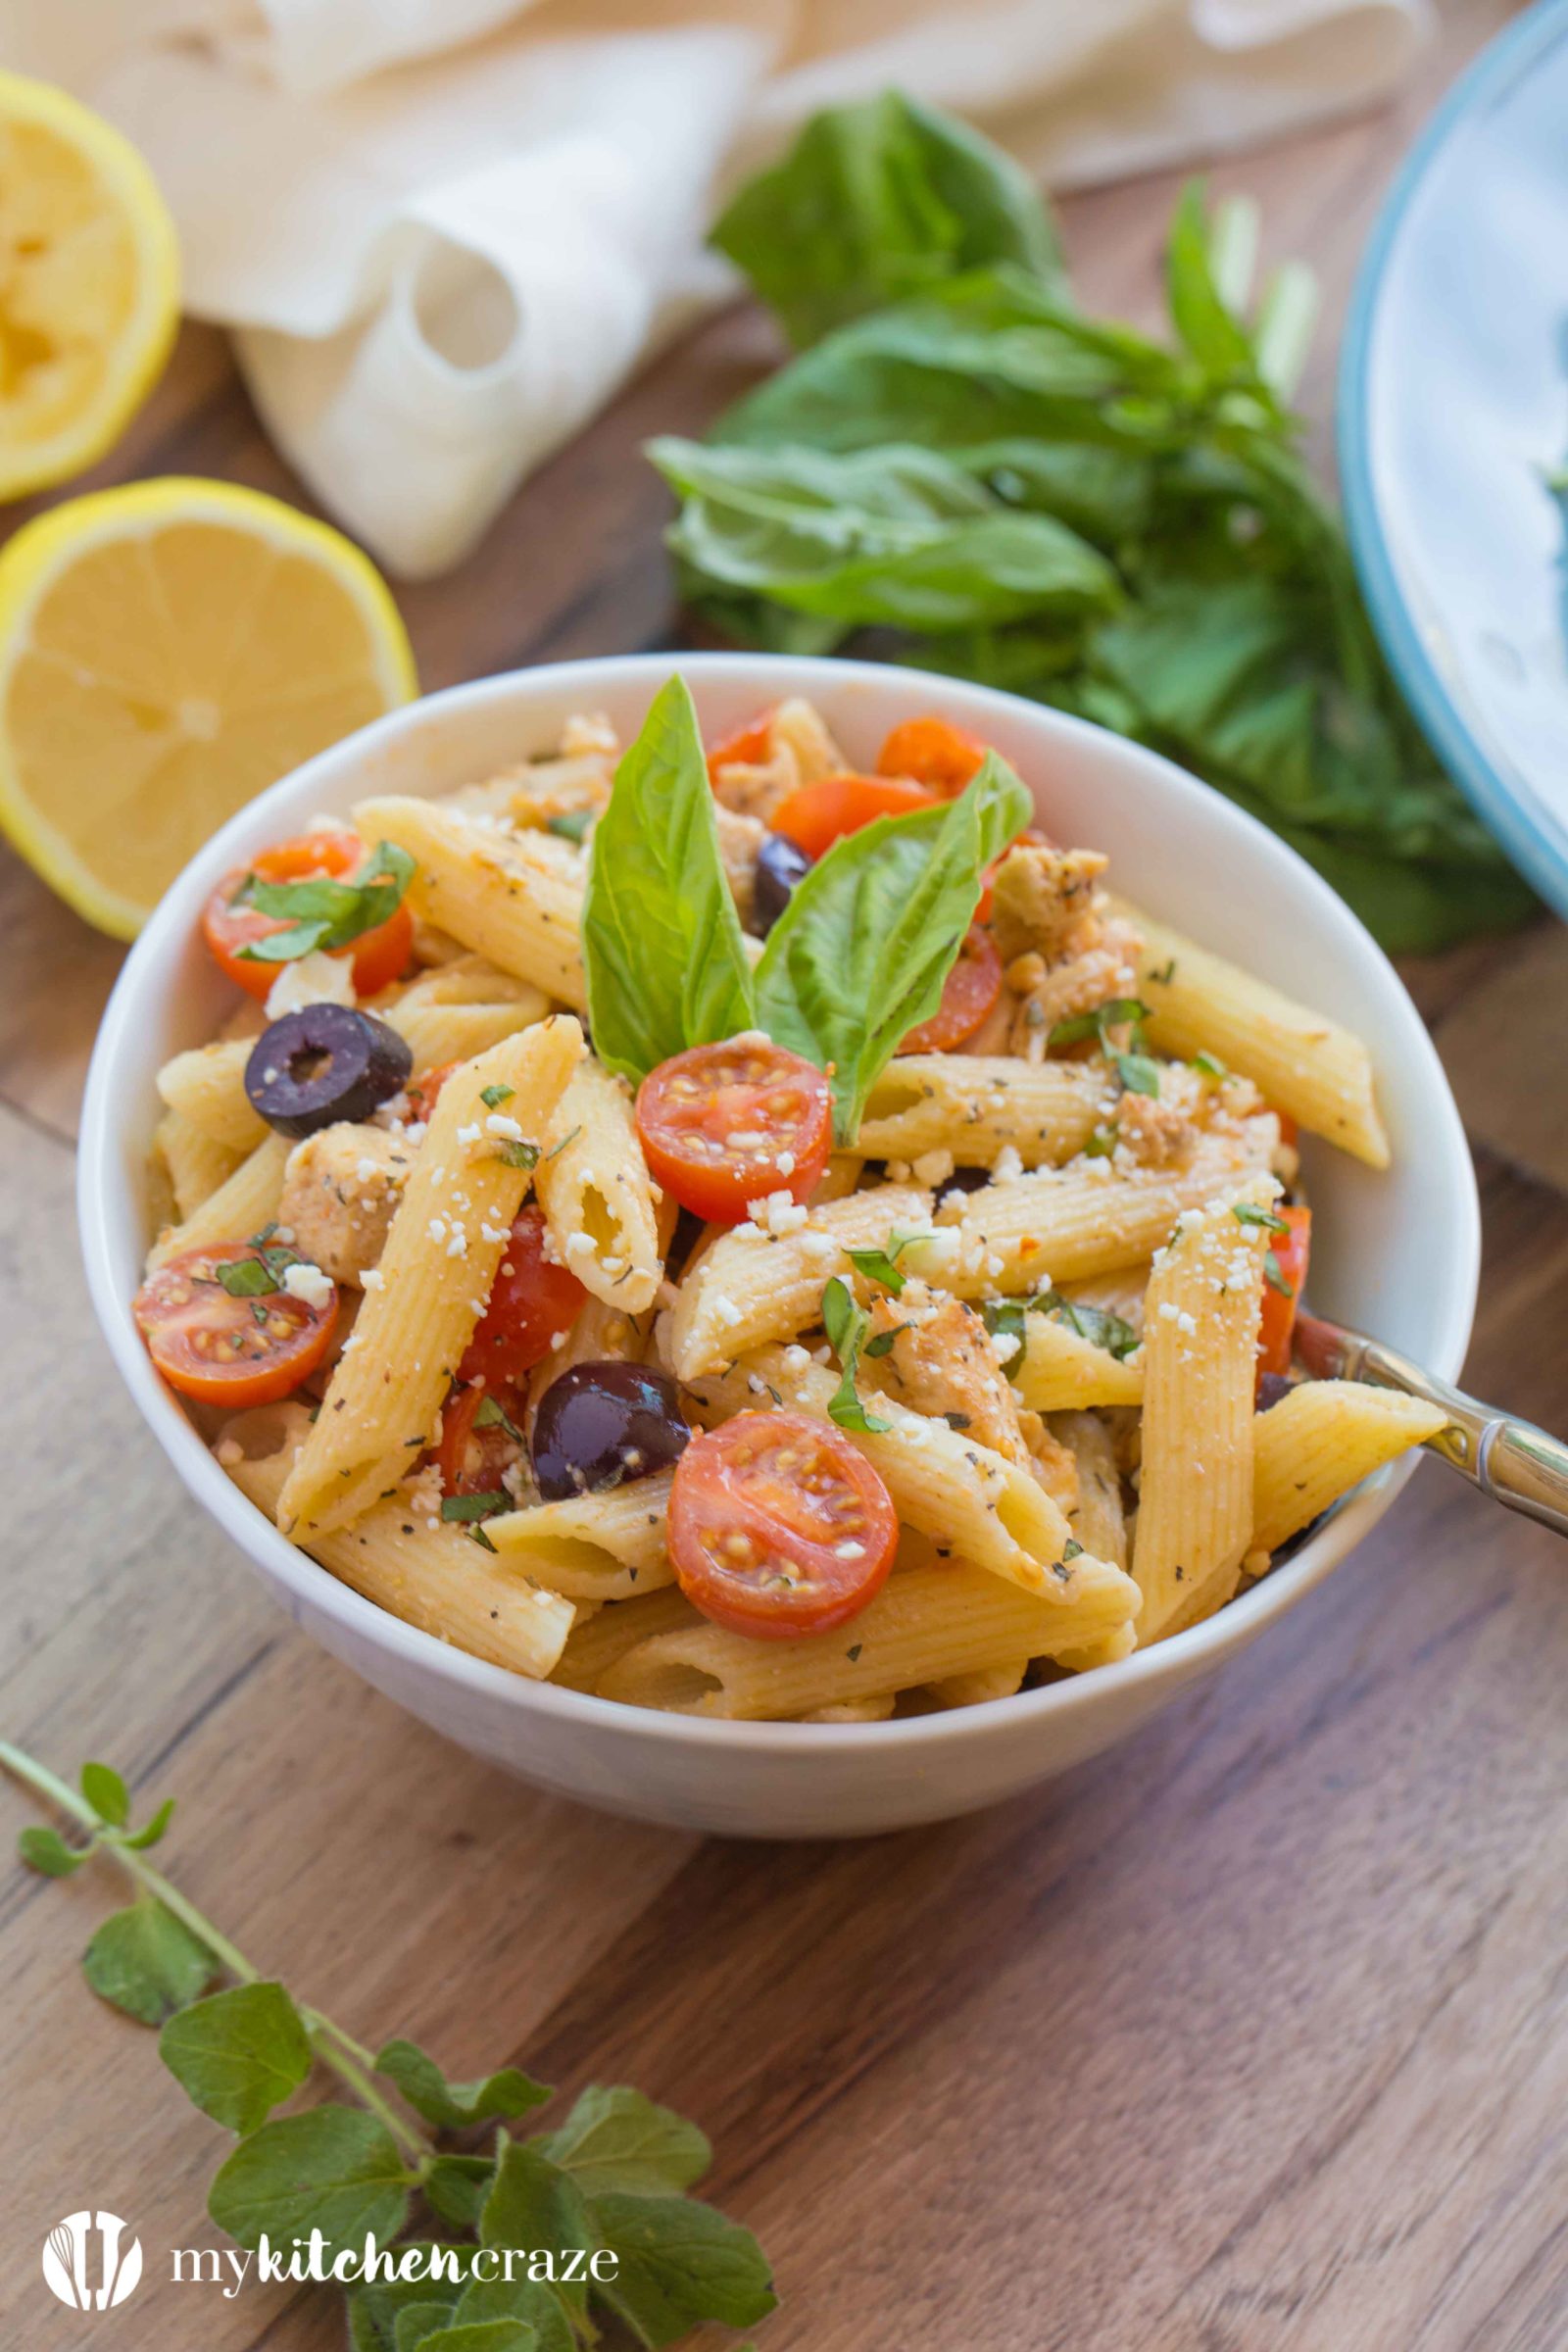 Greek Chicken & Feta Pasta is the perfect easy meal for those busy nights. This recipe is a no fuss recipe that everyone will love.